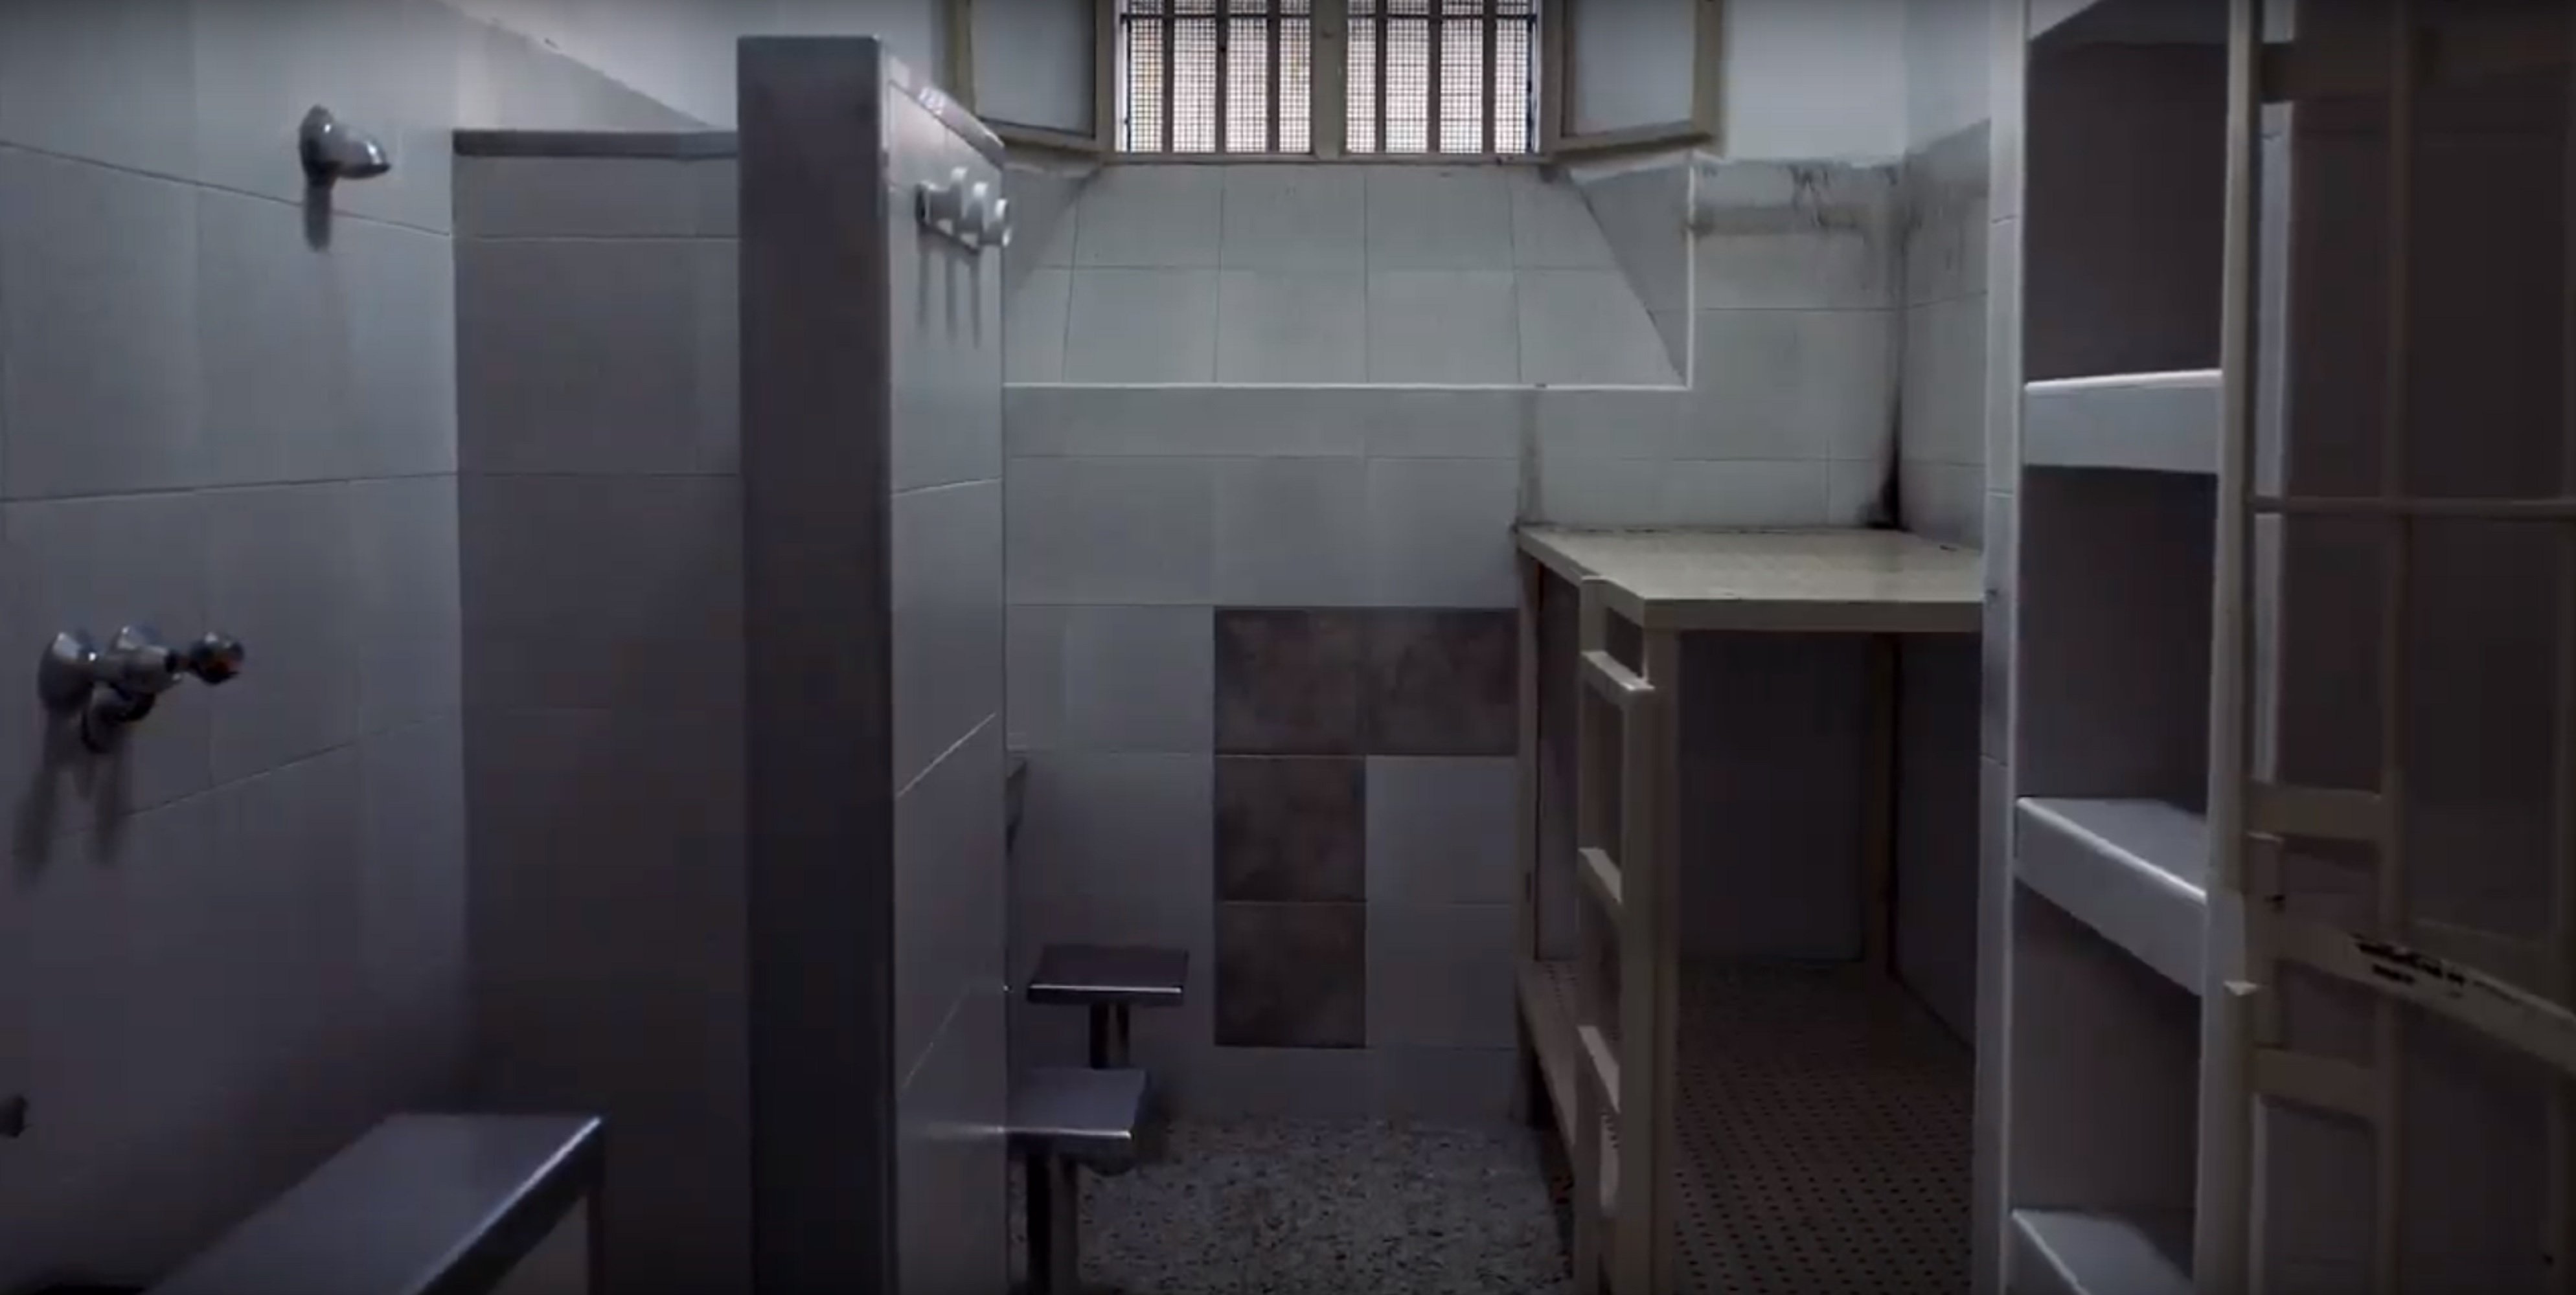 A video to bring home the distressing reality of life in a cell, by Òmnium